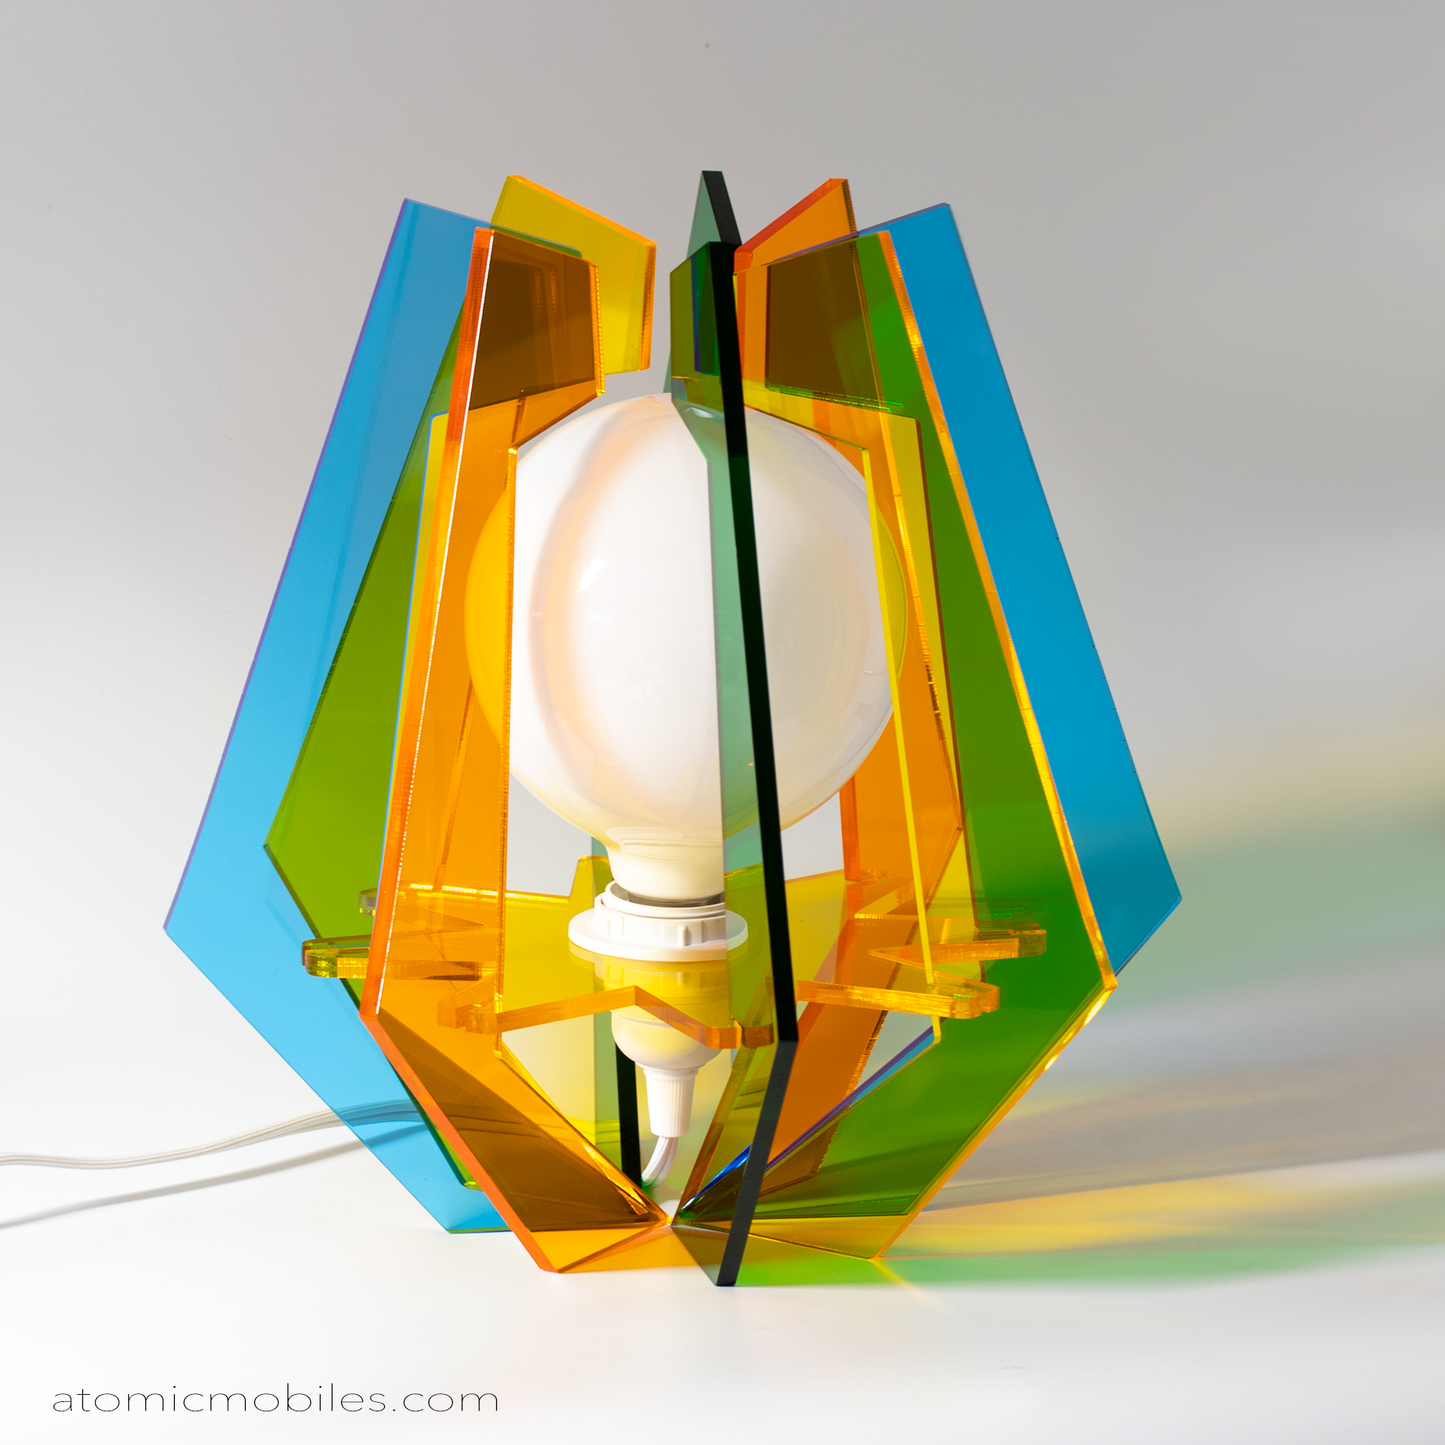 Unique retro mid century modern style table top lamp in clear orange, green, yellow, and blue plexiglass acrylic made in Los Angeles by AtomicMobiles.com